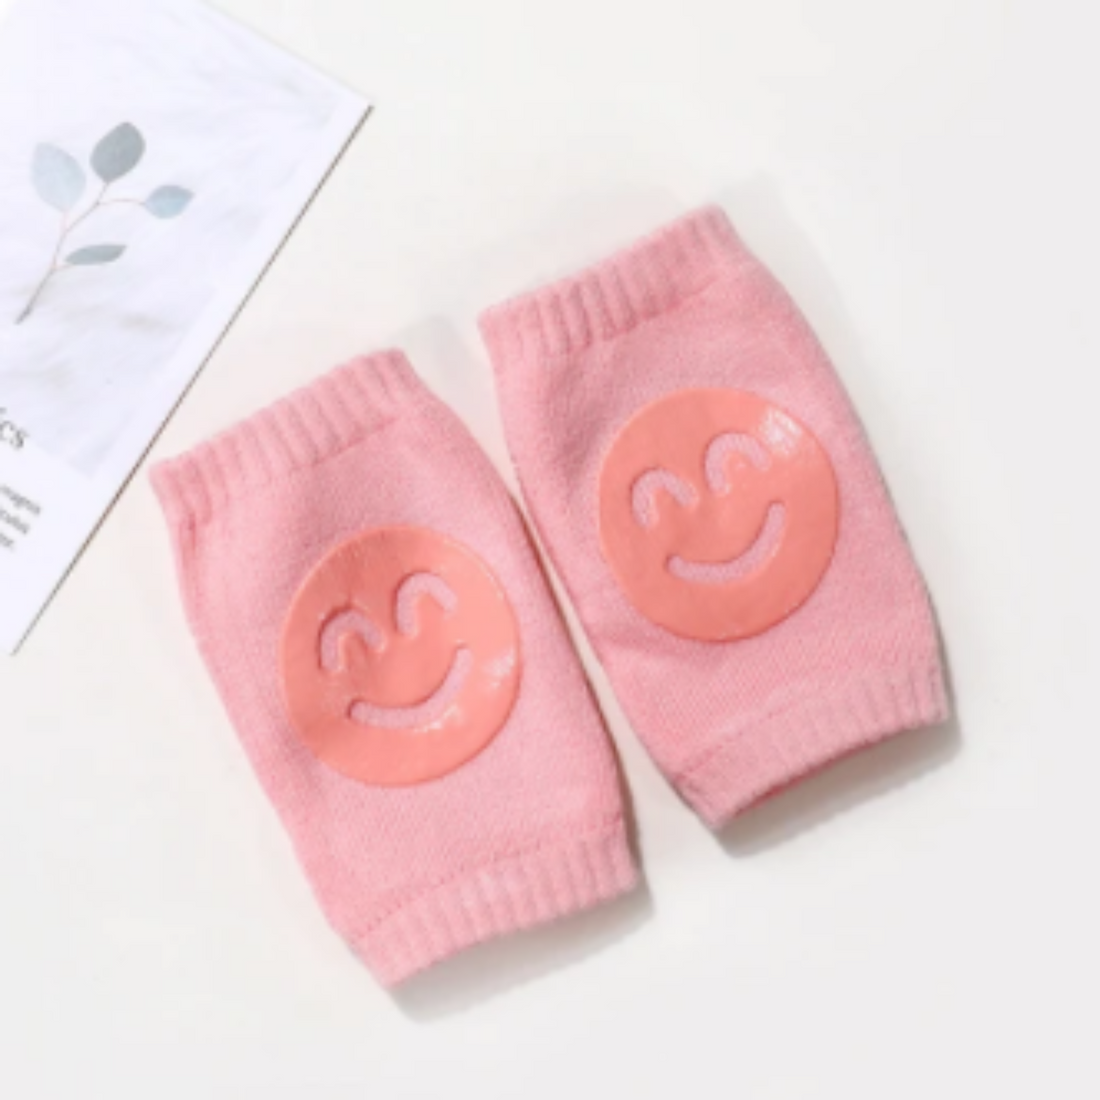 Soft knee pads for active babies